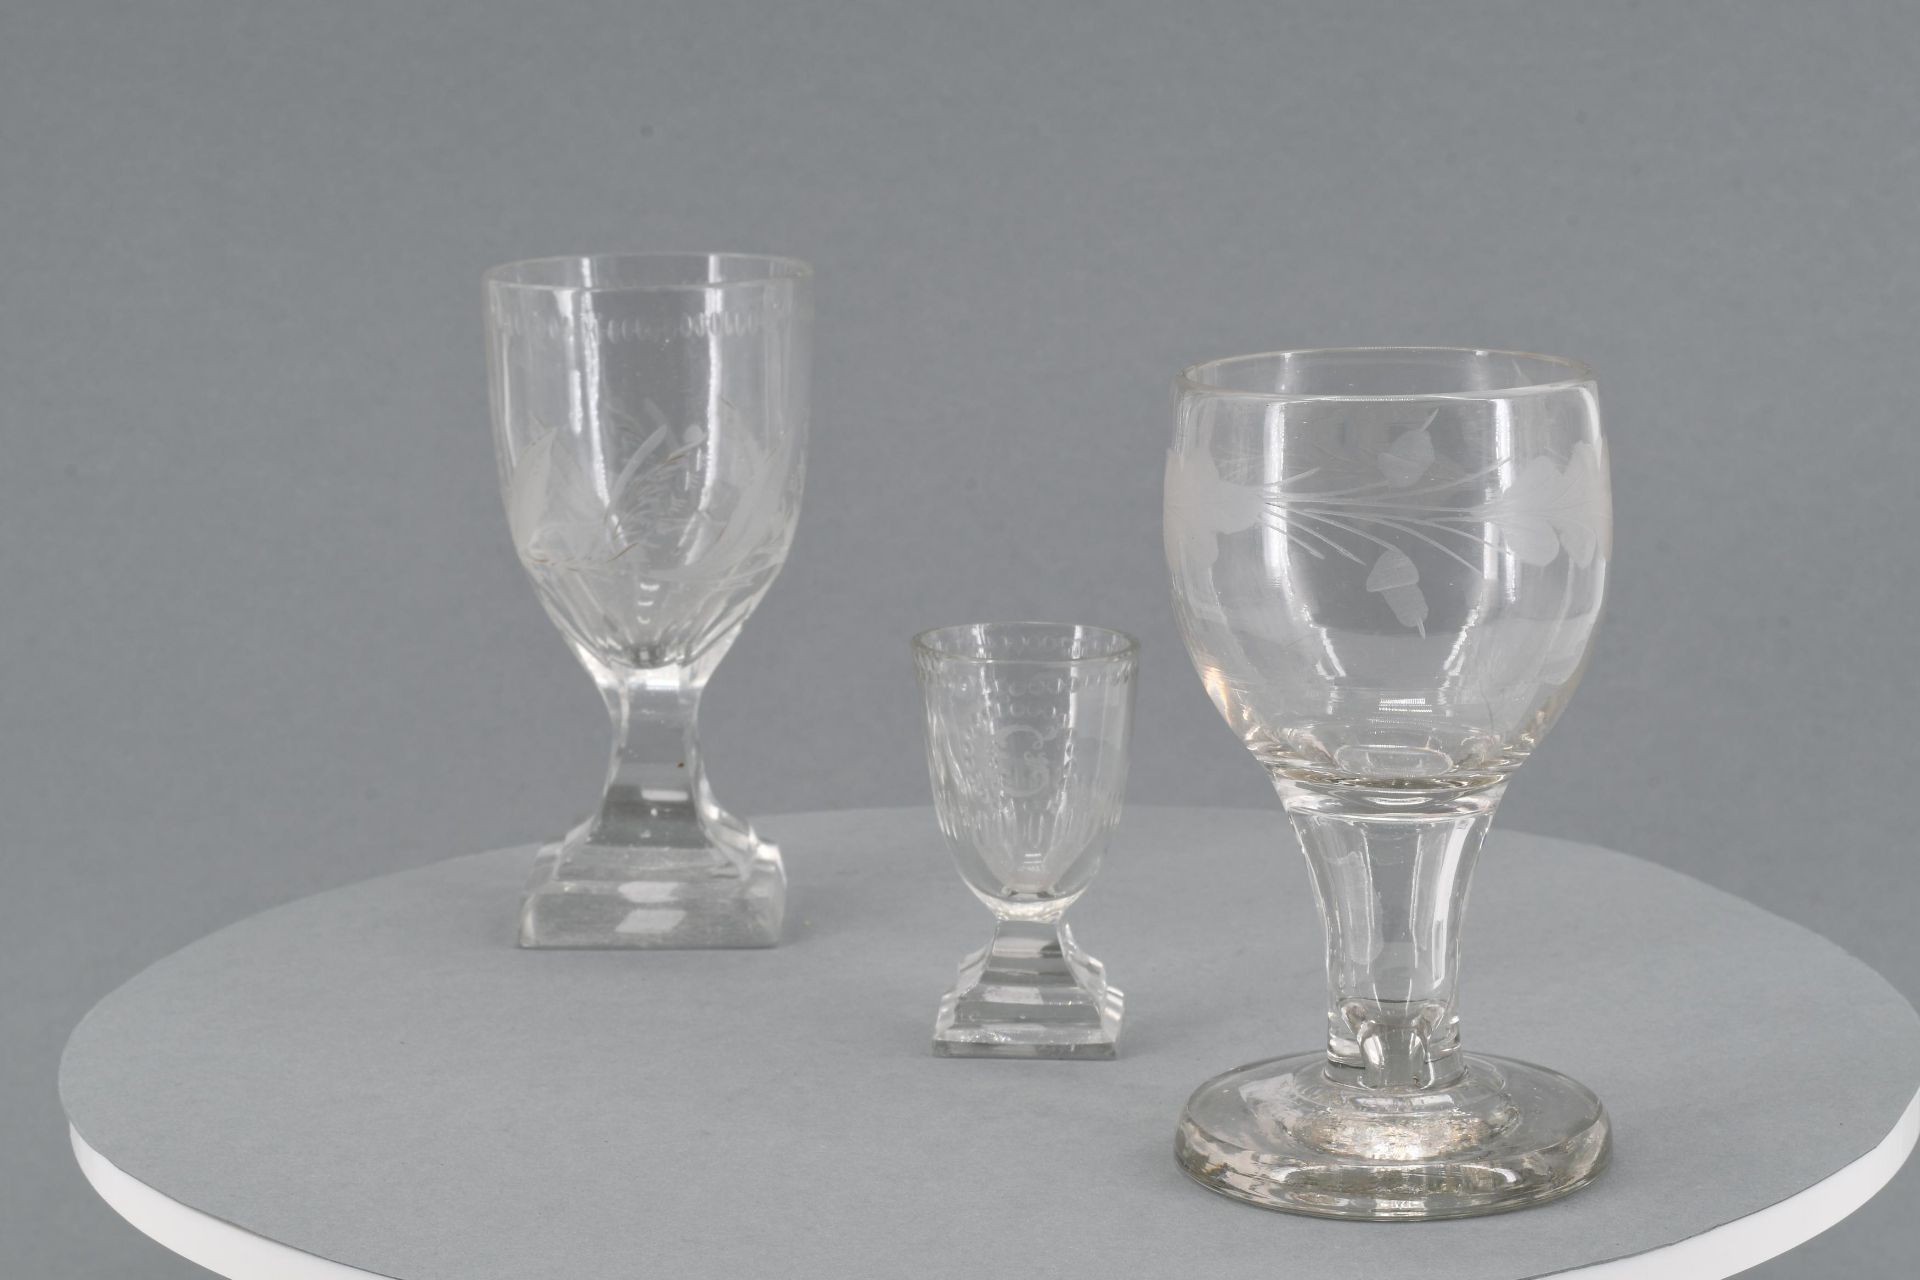 Goblet with monogram and schnapps glass with blue rim - Image 12 of 15